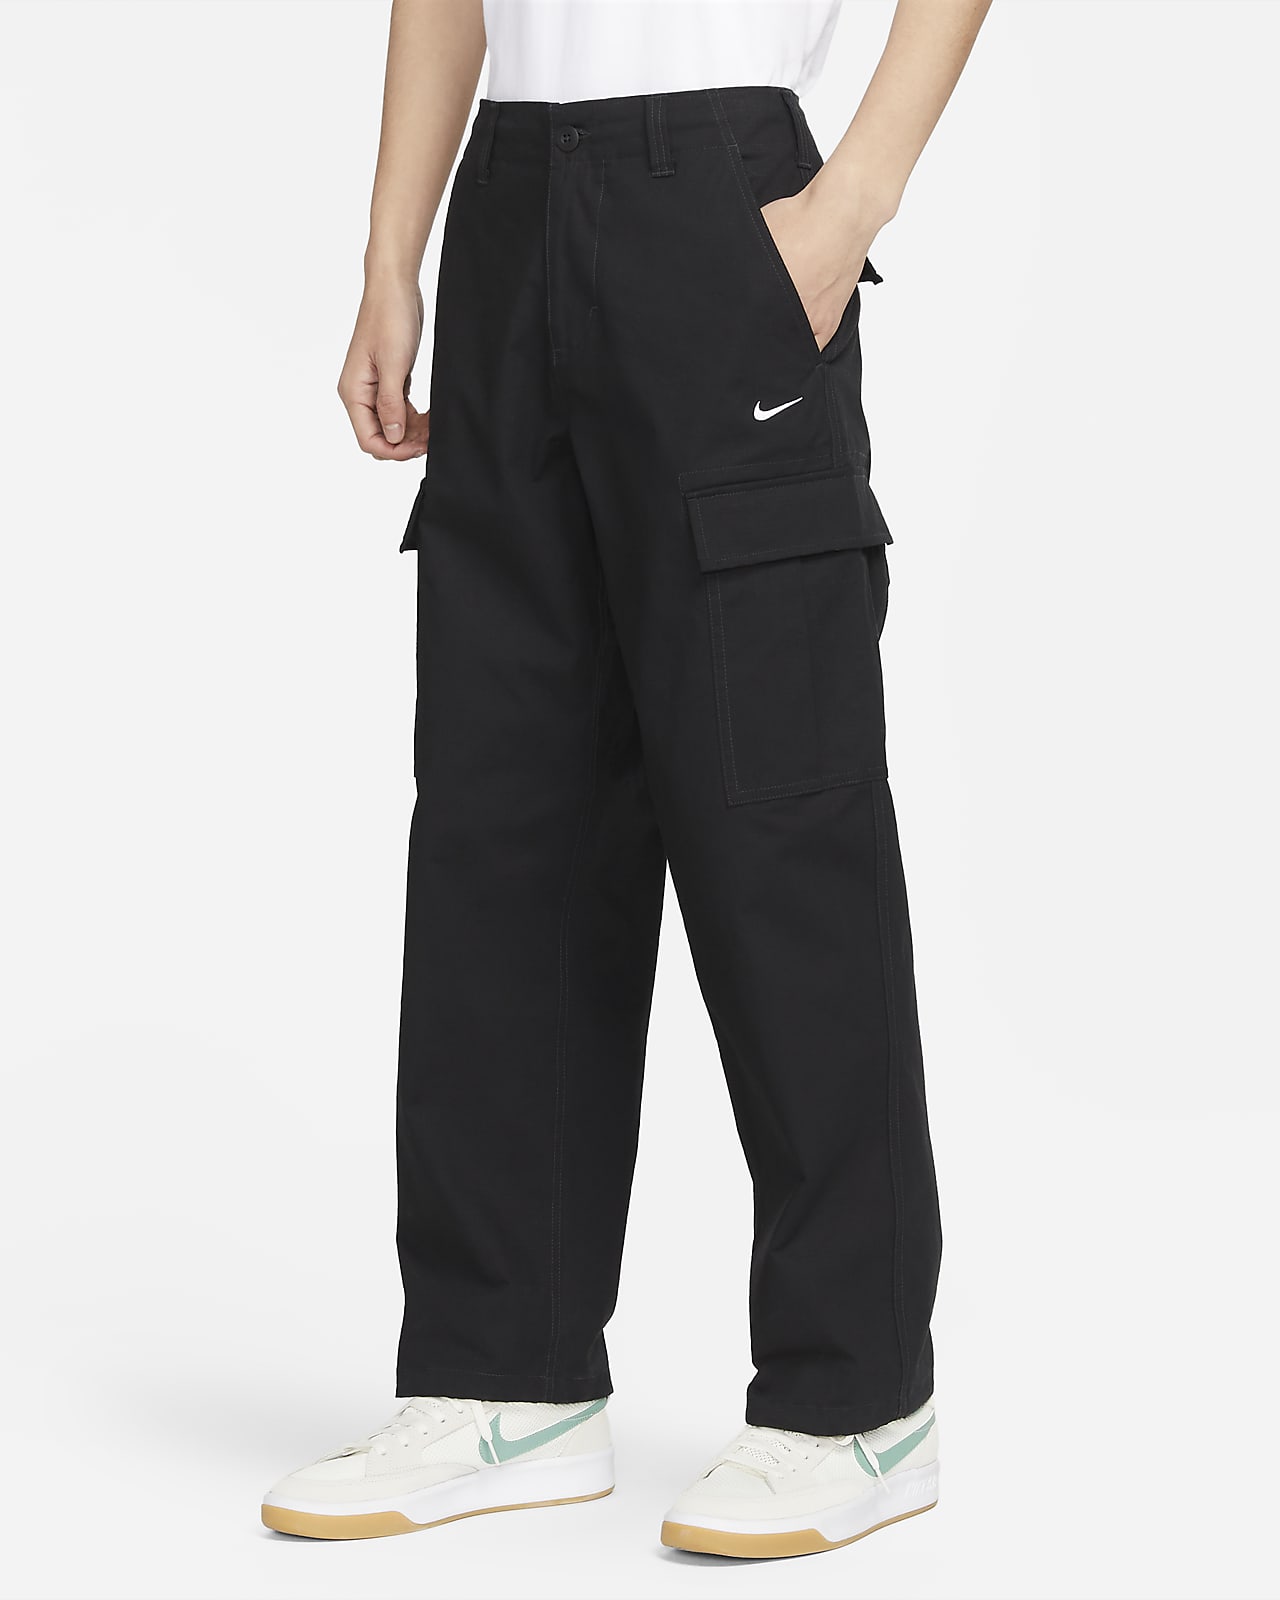 Nike Mens Fc Woven Football Tracksuit Bottoms BlackWhiteSaturn Gold in  Bangalore at best price by Nike INDIA Pvt Ltd Head Office  Justdial